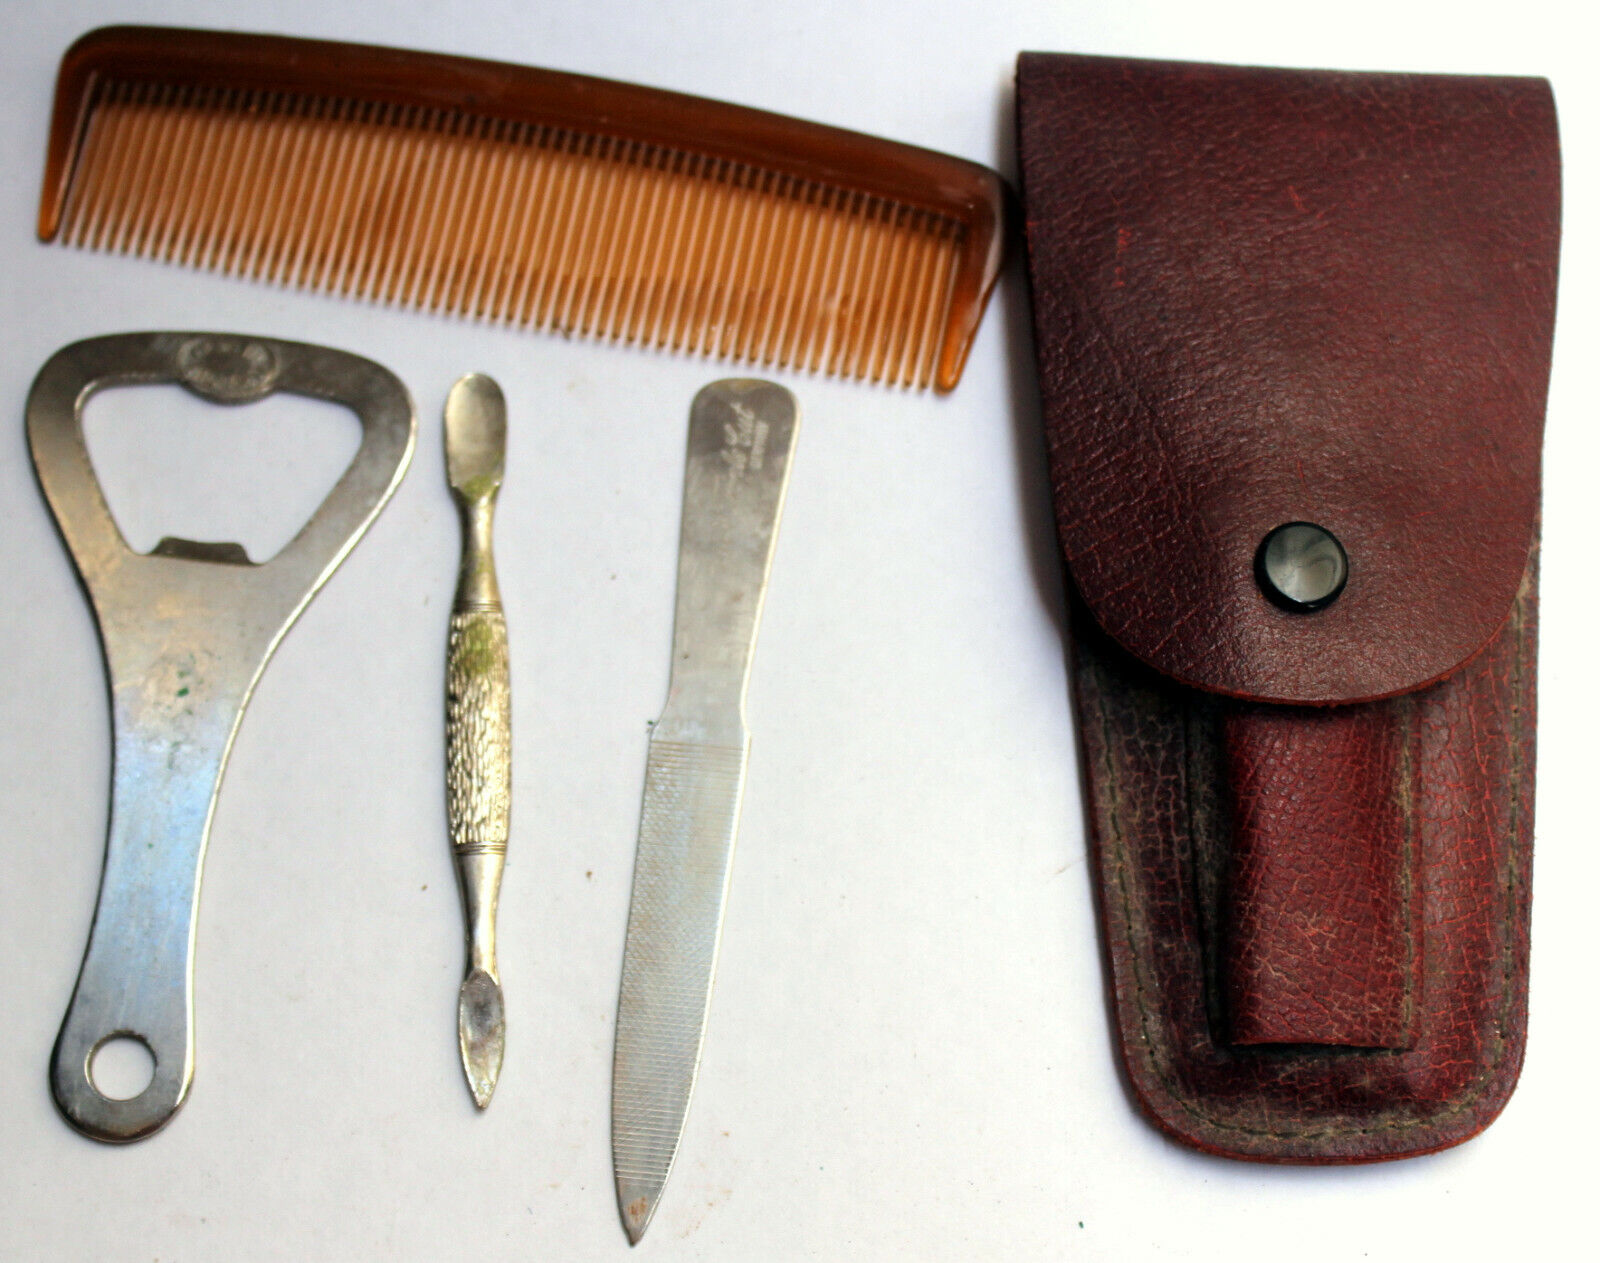 Vintage English Grooming Travel Kit in Leather Case Bottle Opener Comb Nail File